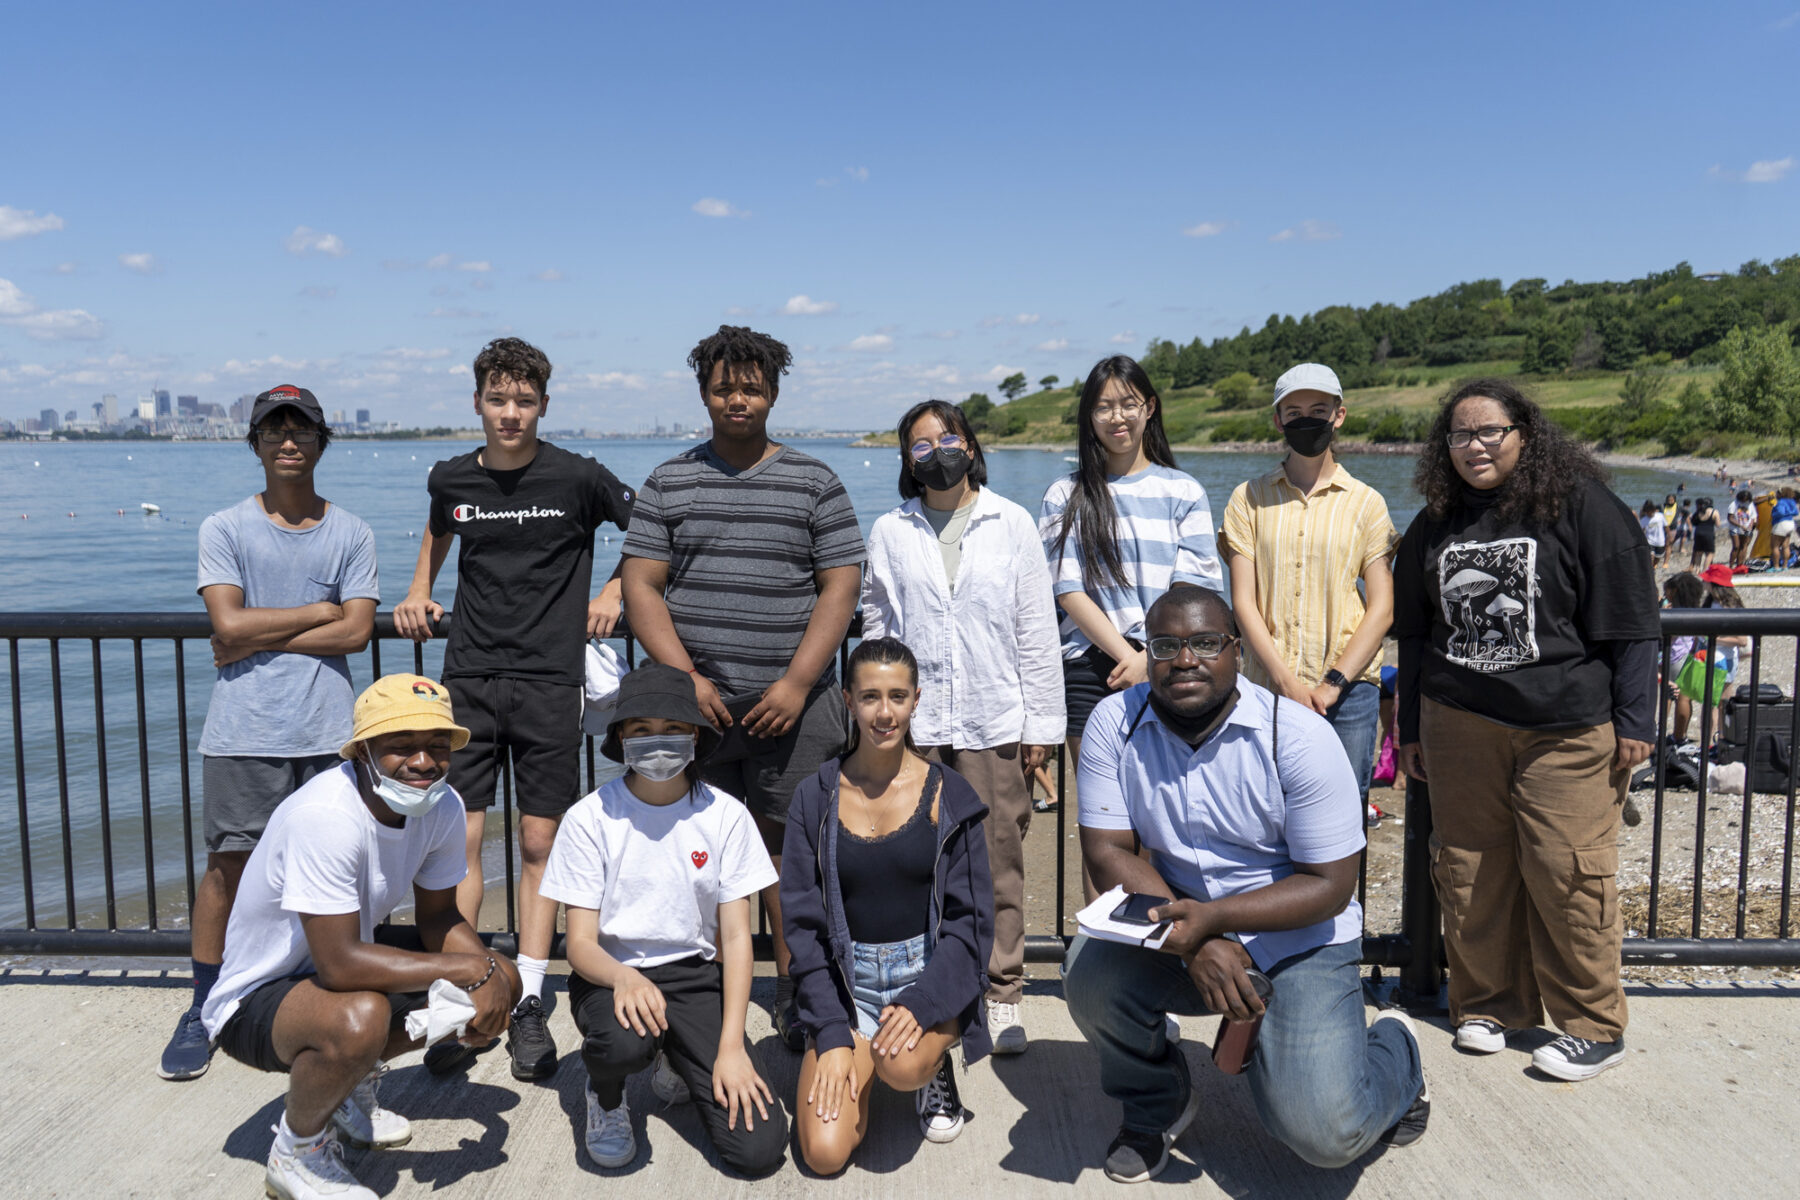 Group photo of high school students at a waterfront